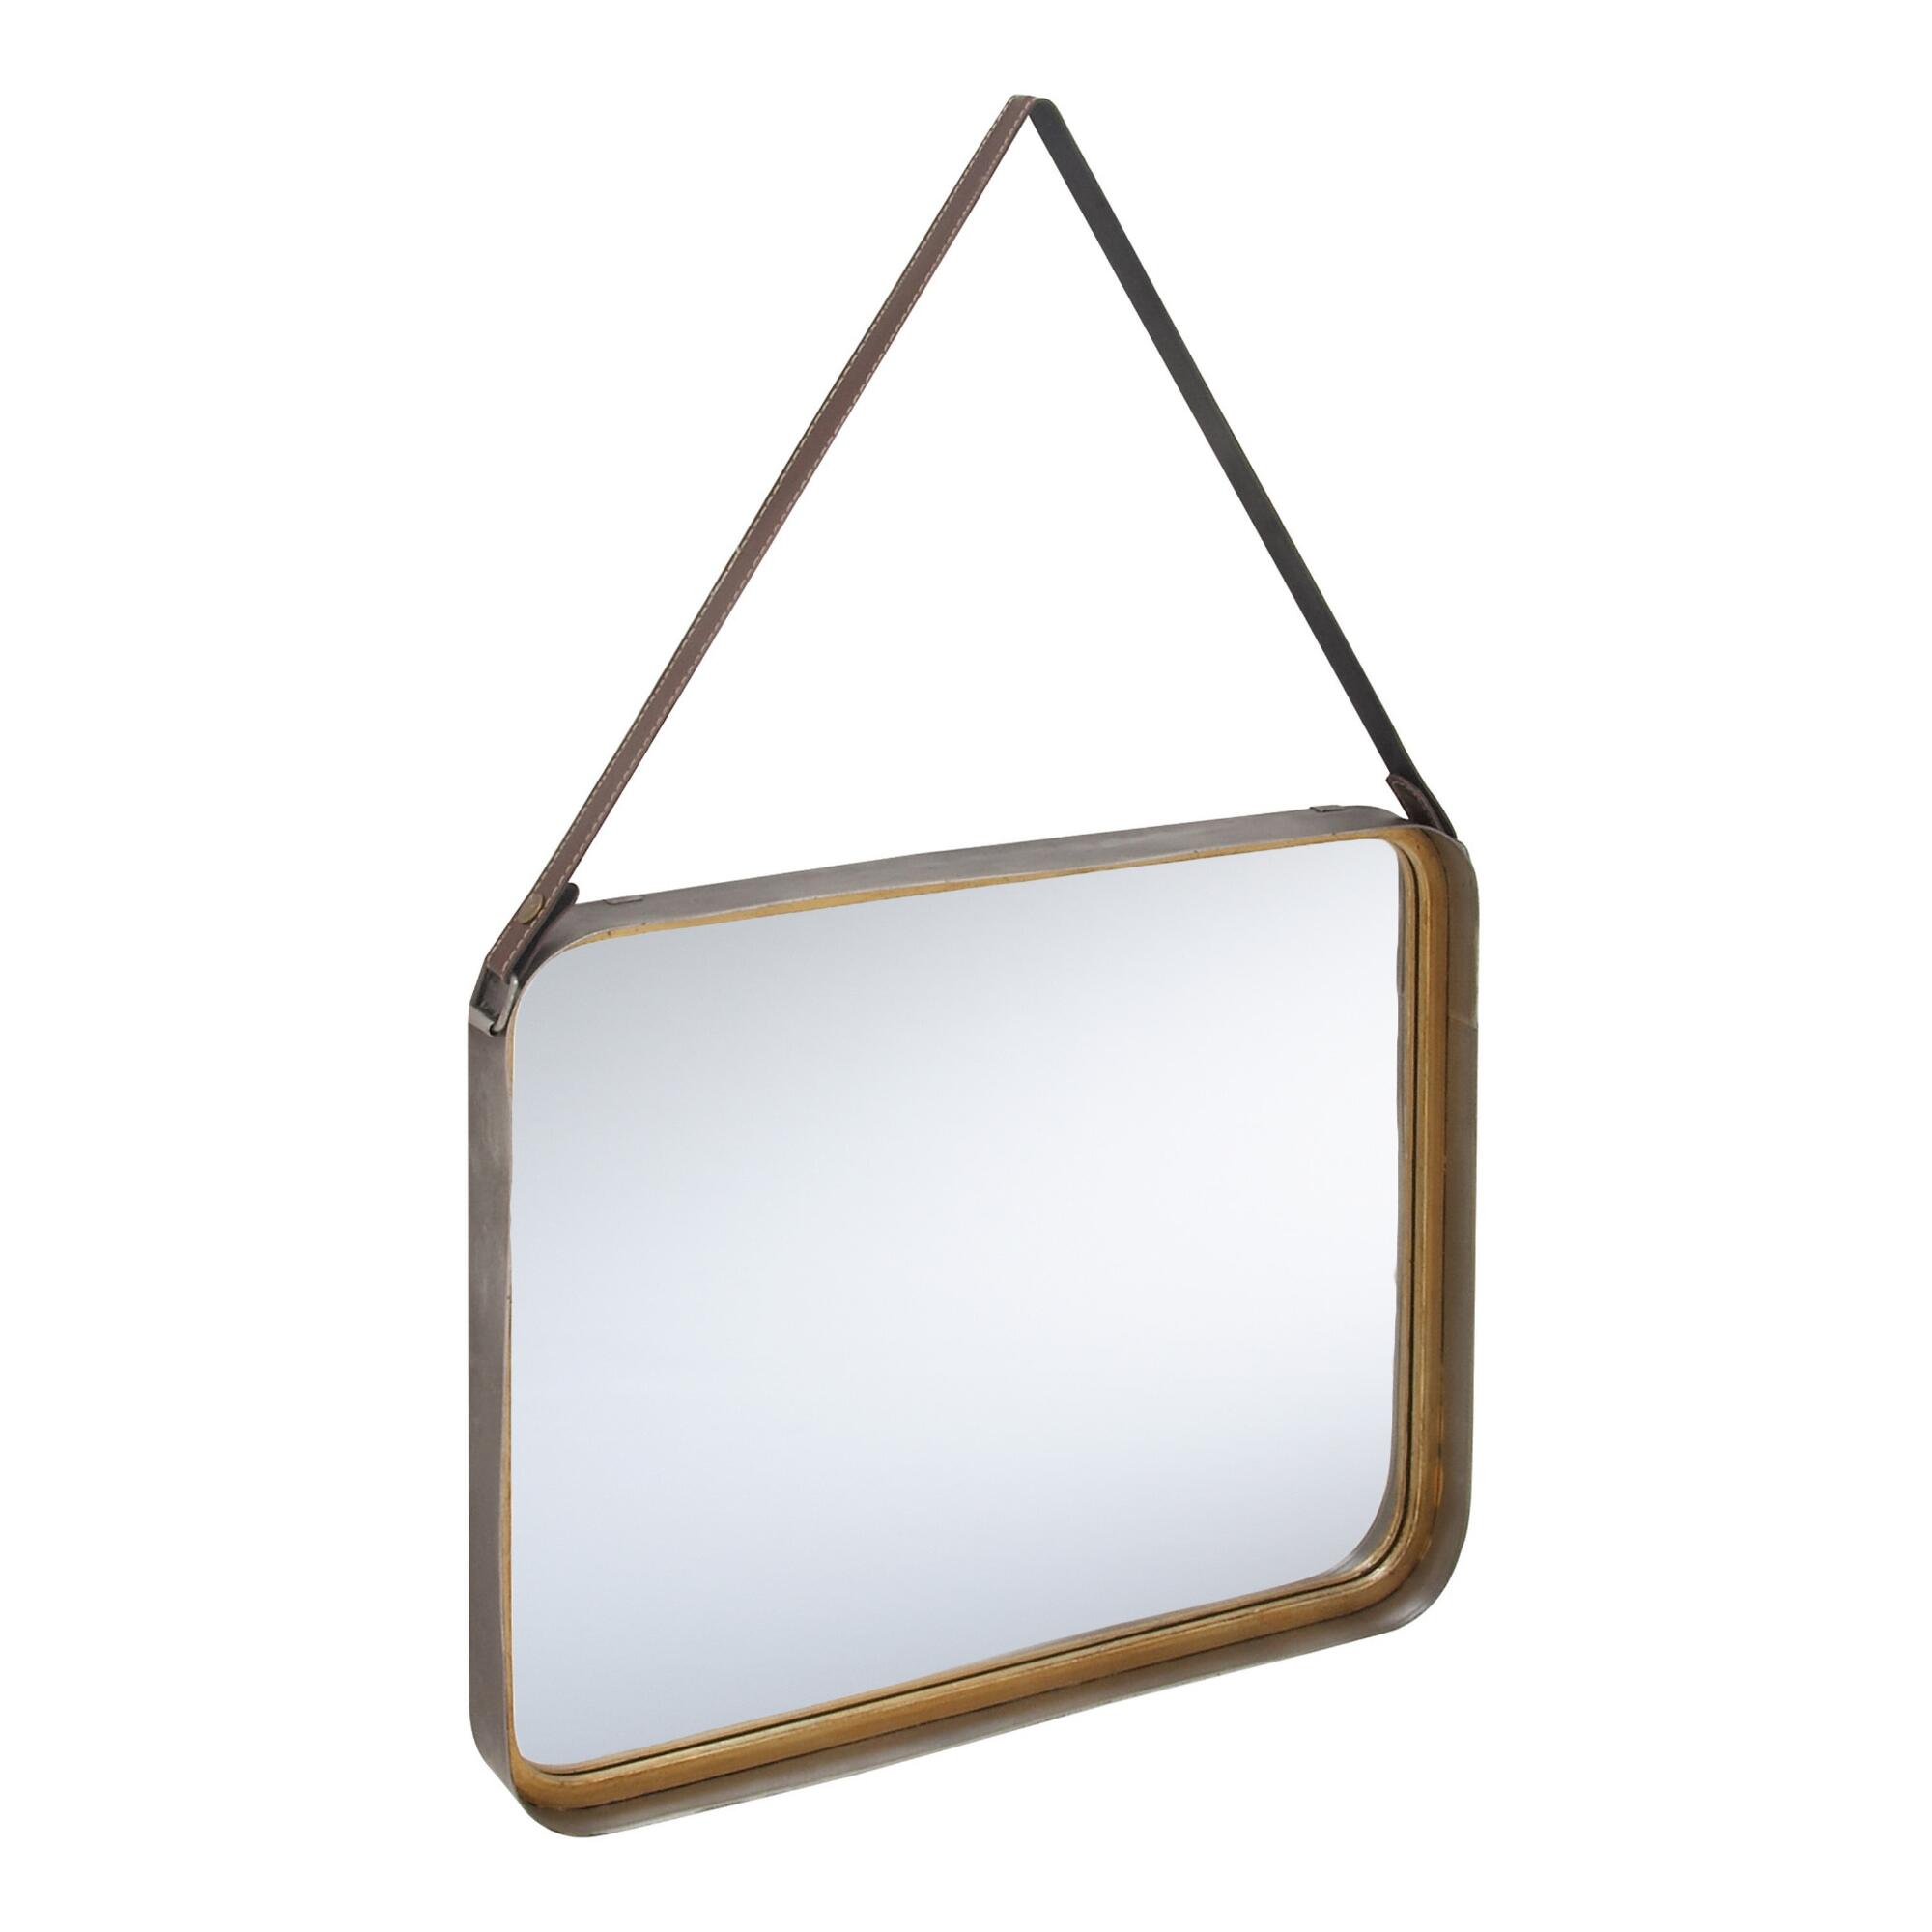 Rounded Rectangular Gold Mirror With Strap by World Market